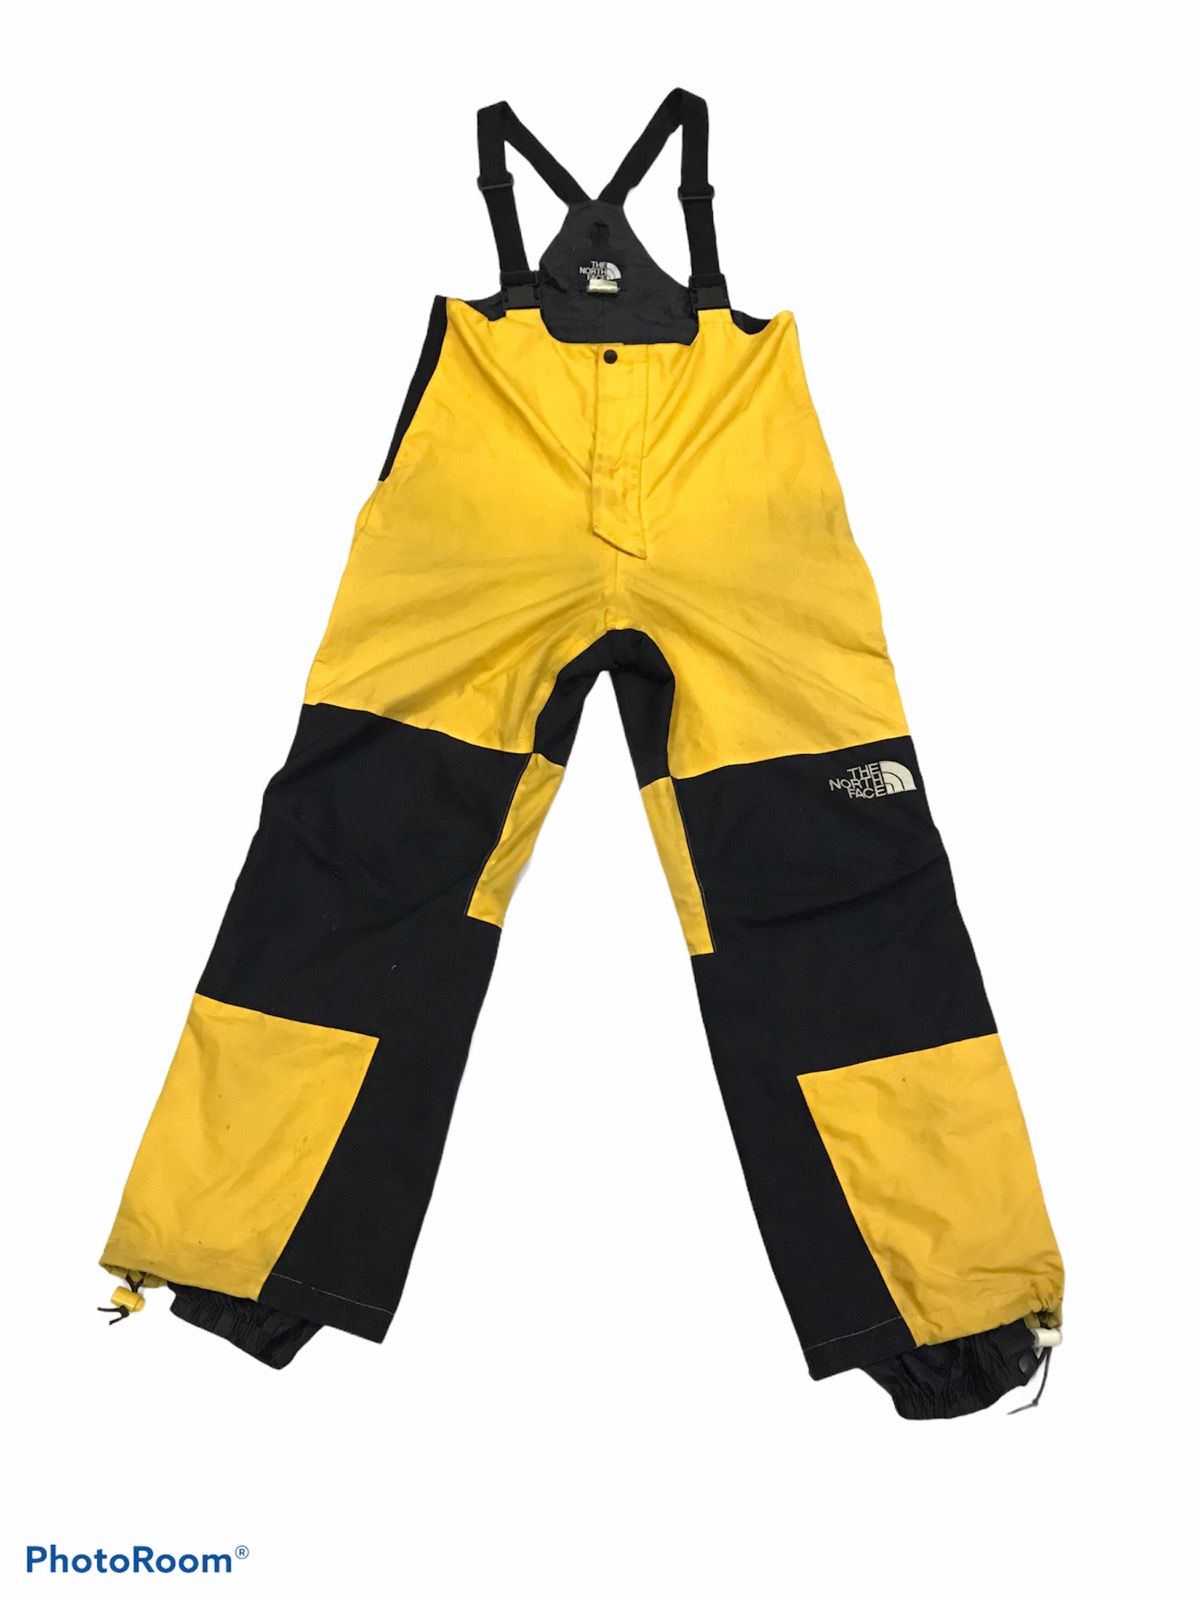 THE NORTH FACE” GORE-TEX SKI PANTS BIBS OVERALLS IN YELLOW - 1